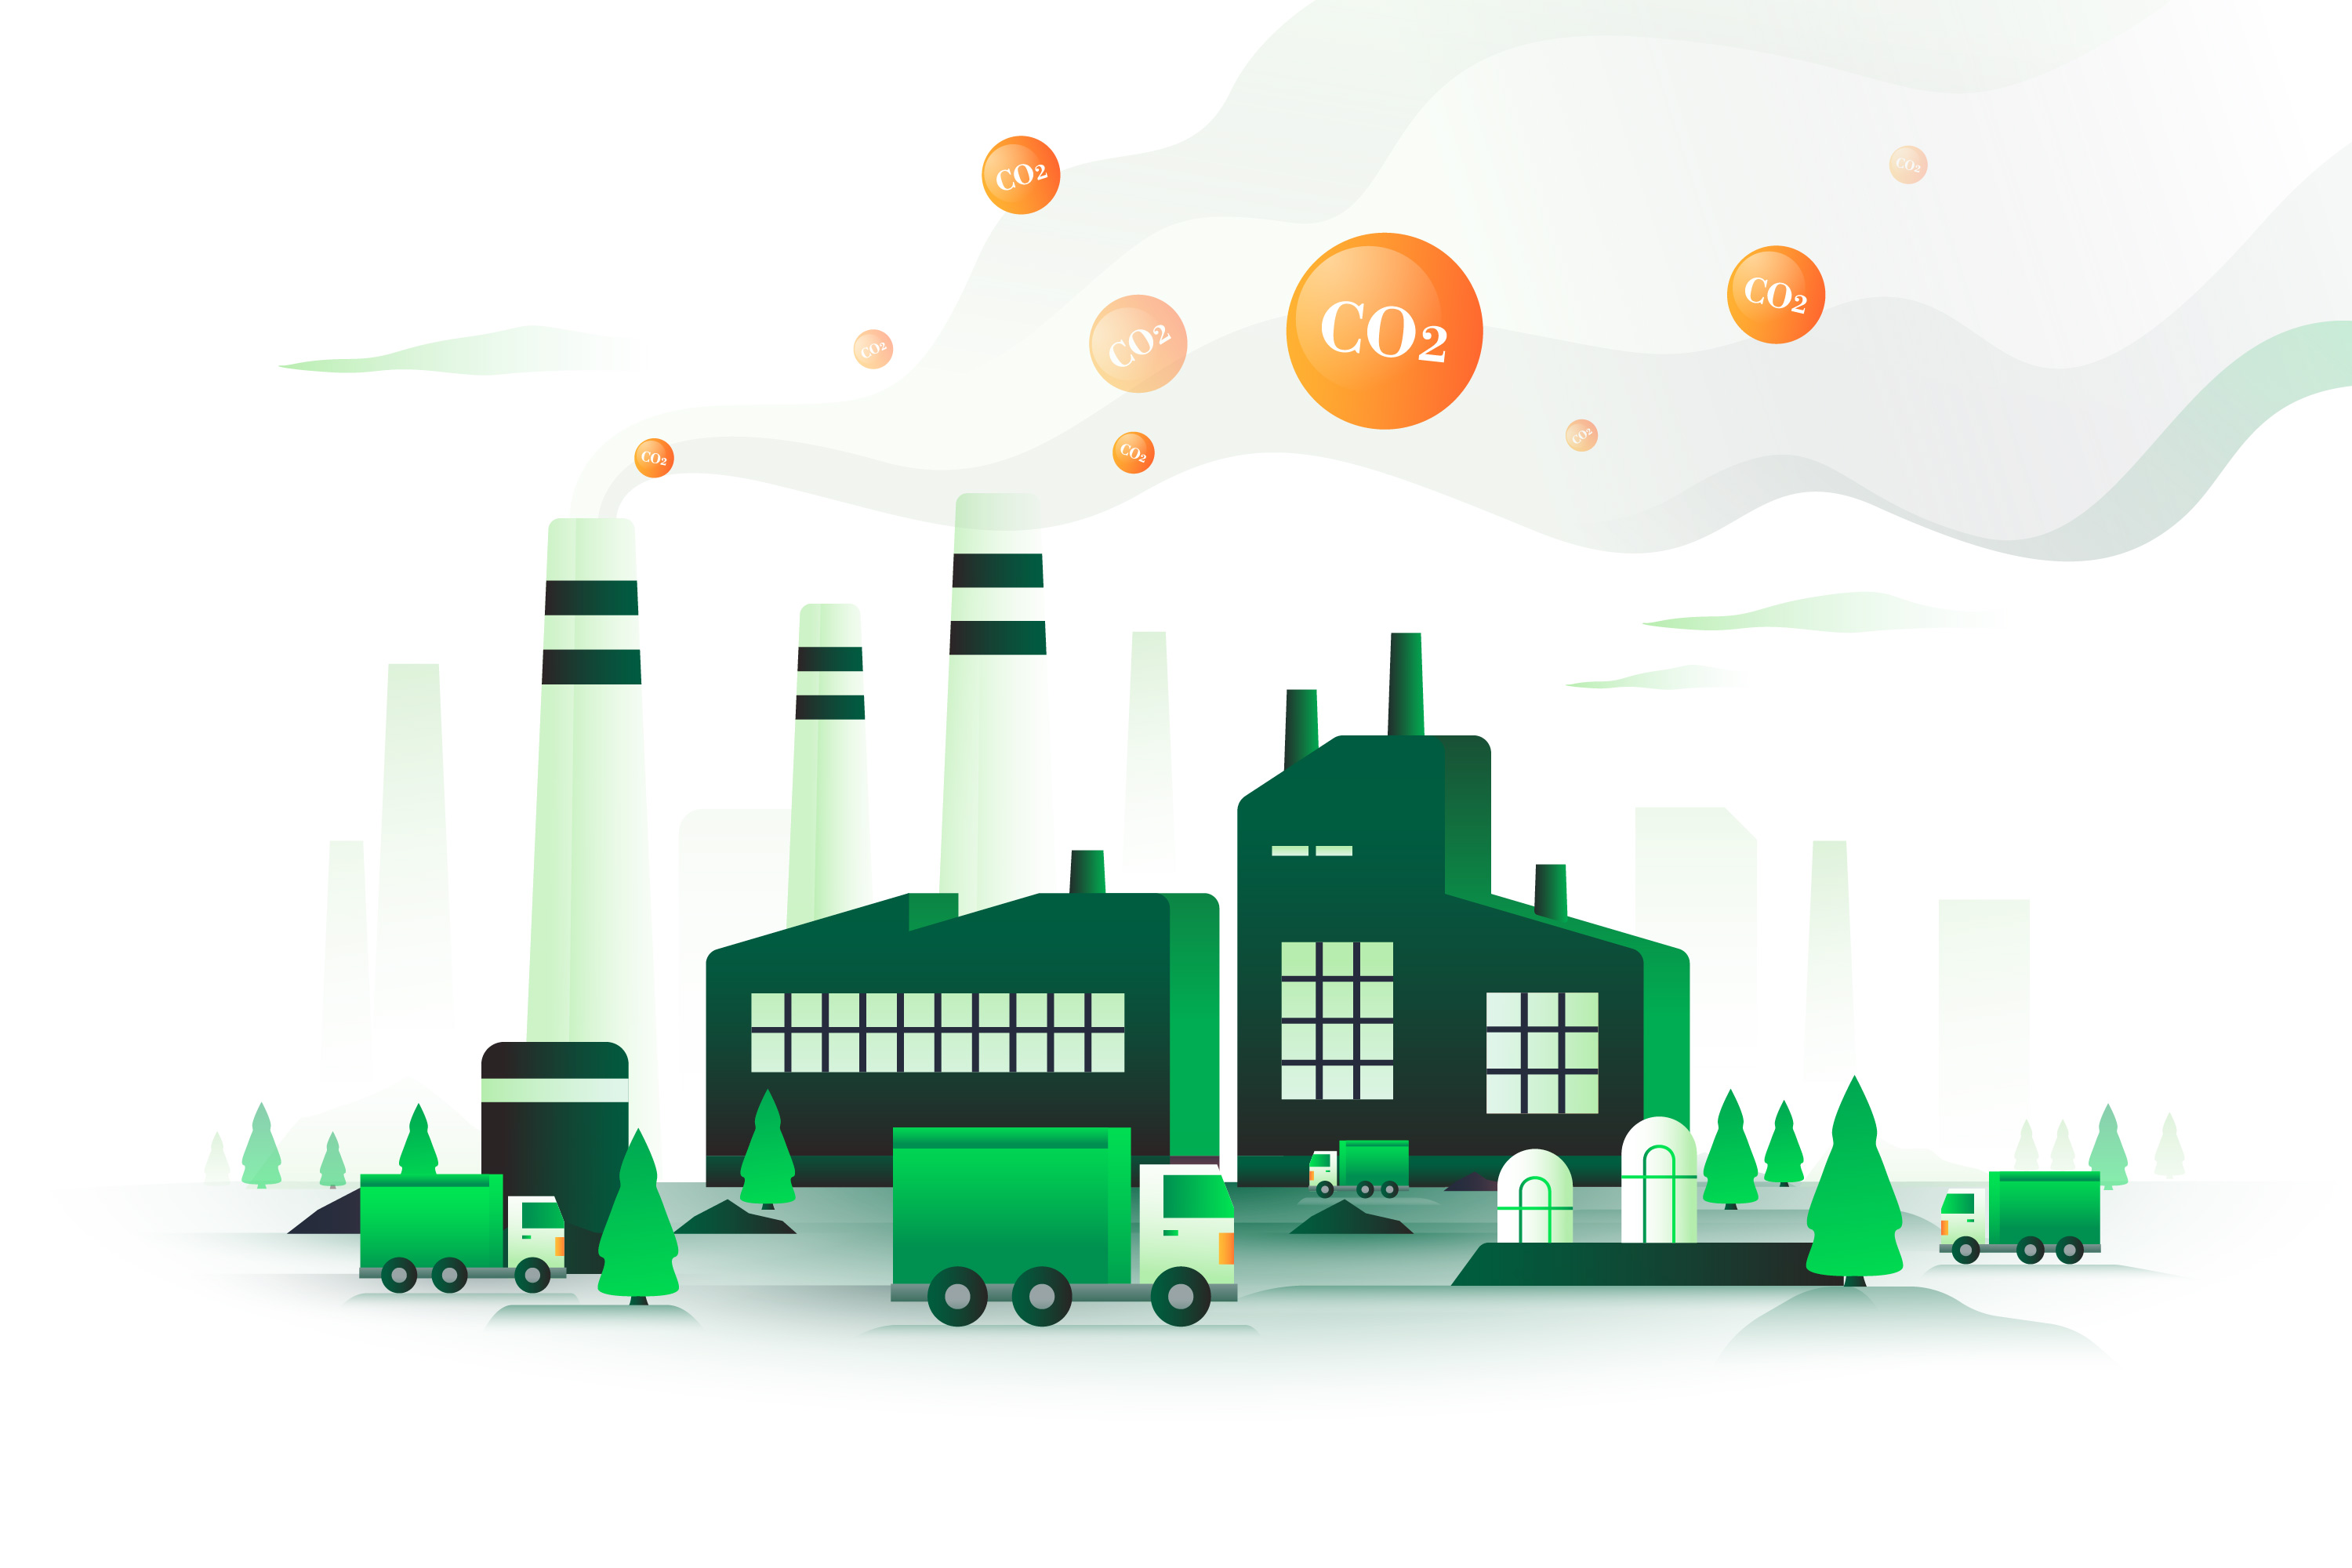 Solutions for the decarbonization of mobility